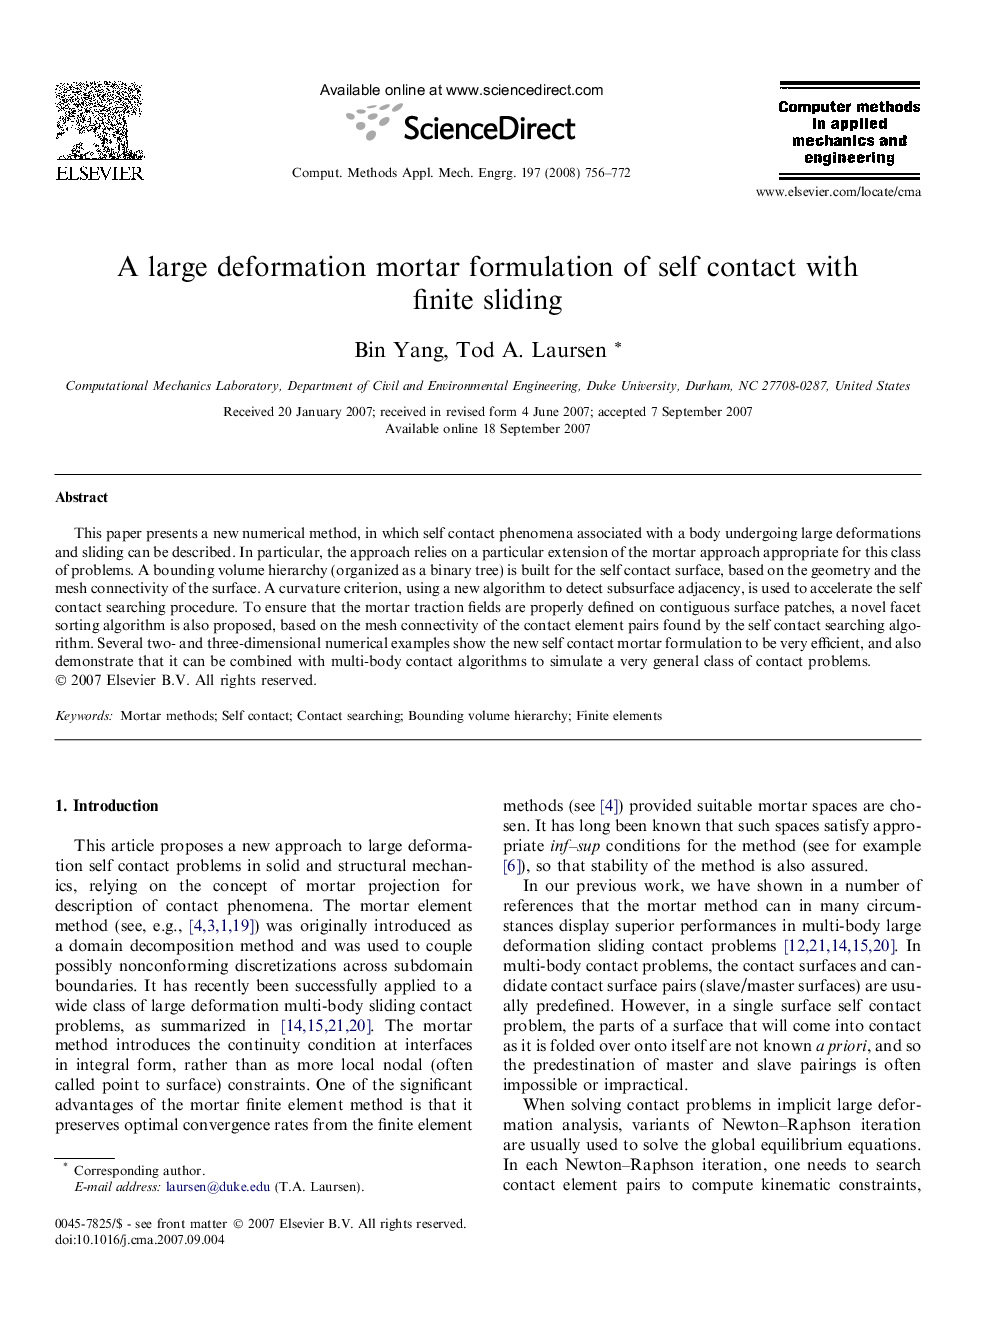 A large deformation mortar formulation of self contact with finite sliding